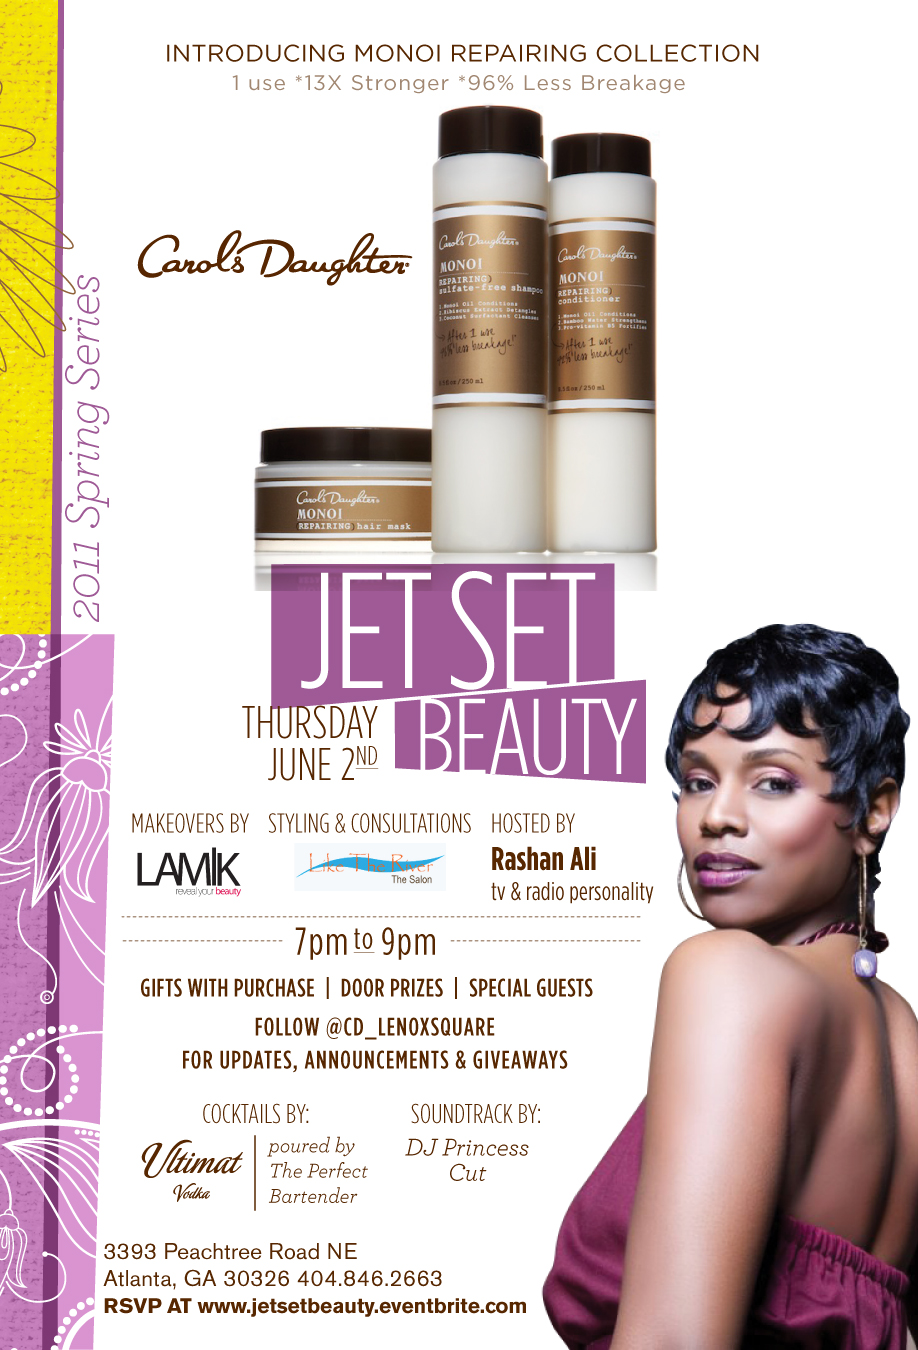 Jet Set Beauty will feature salon owner & stylists from Carol's Daughter